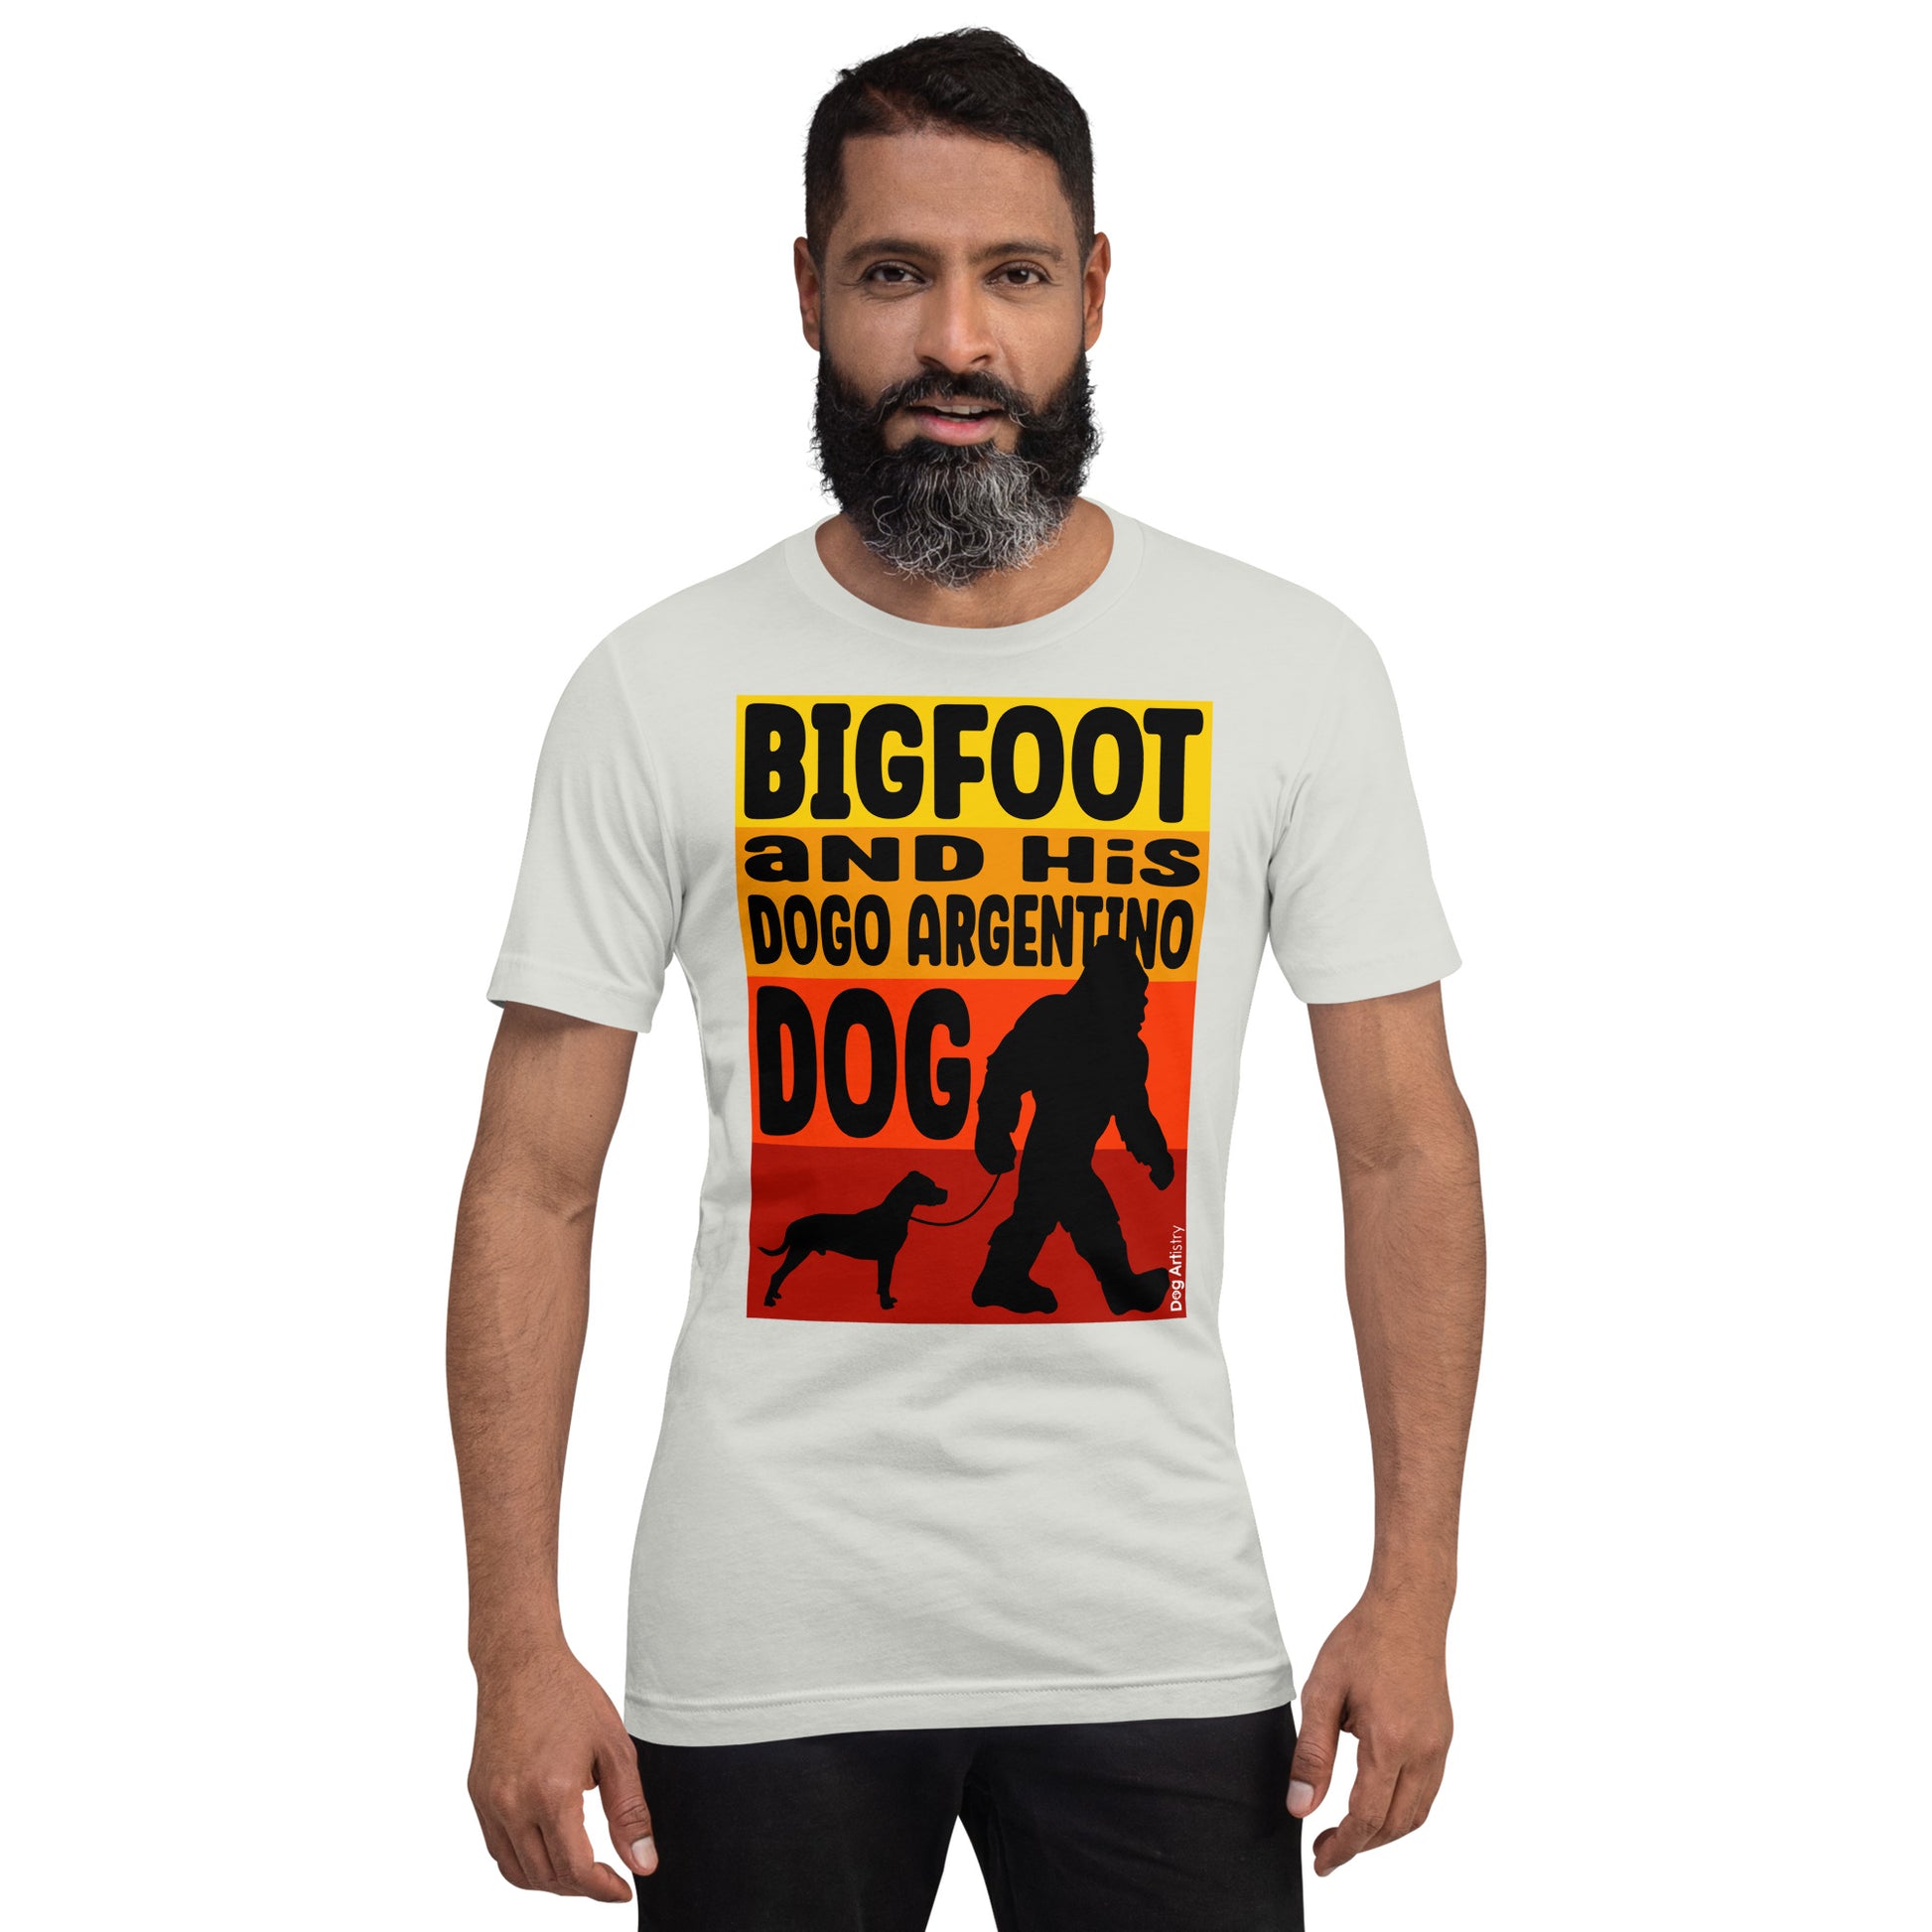 Bigfoot and his Dogo Argentino dog unisex silver t-shirt by Dog Artistry.